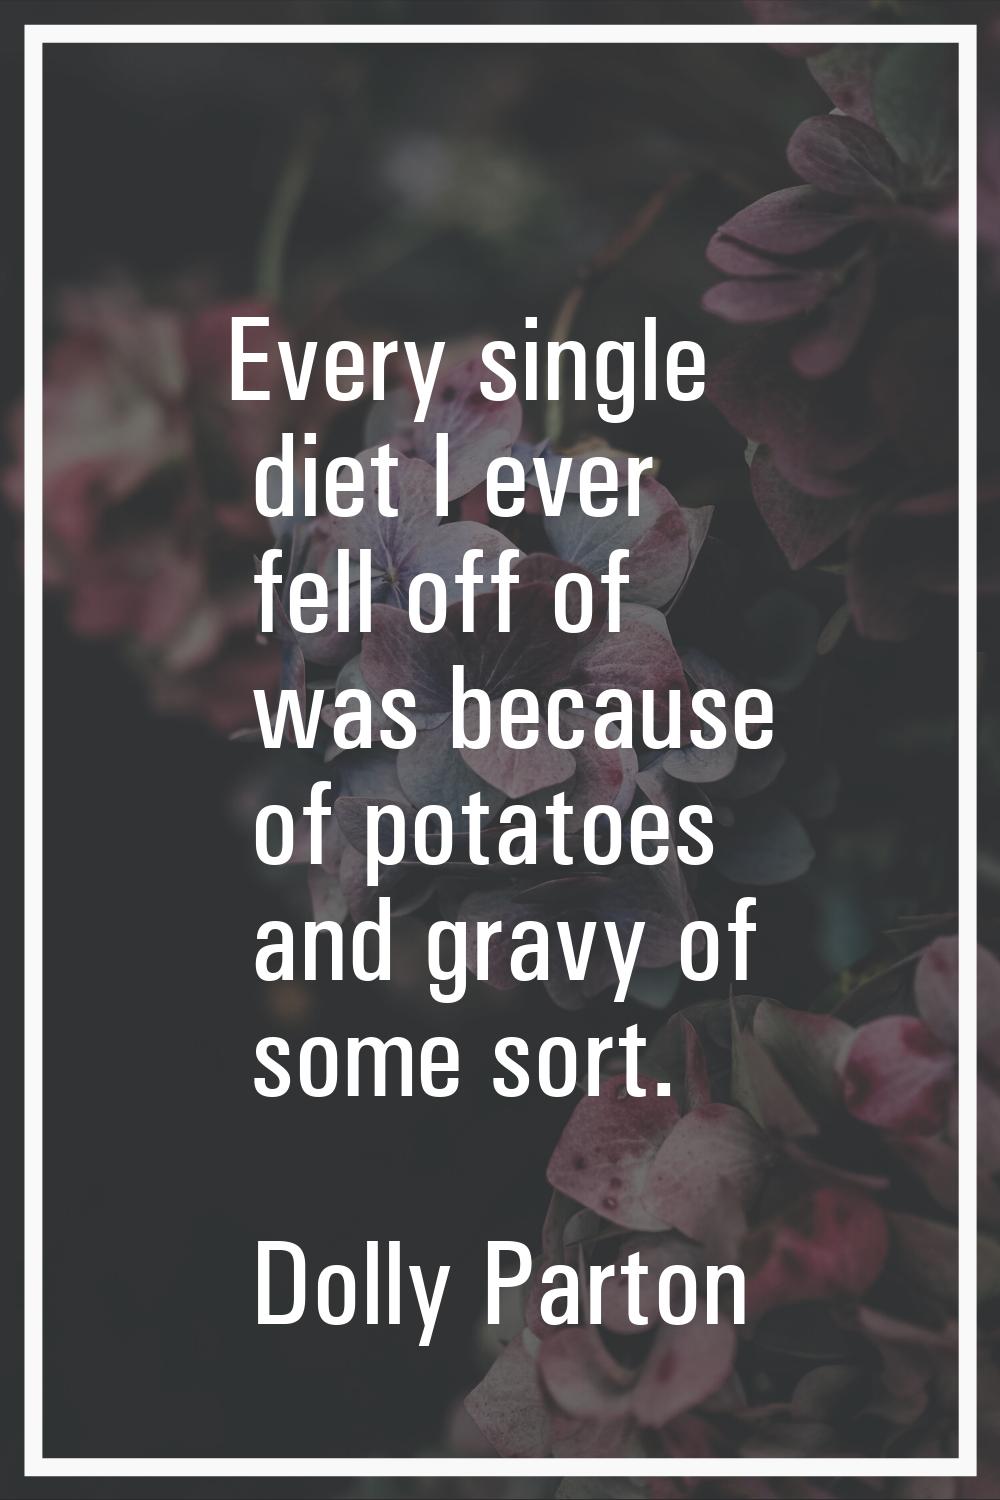 Every single diet I ever fell off of was because of potatoes and gravy of some sort.